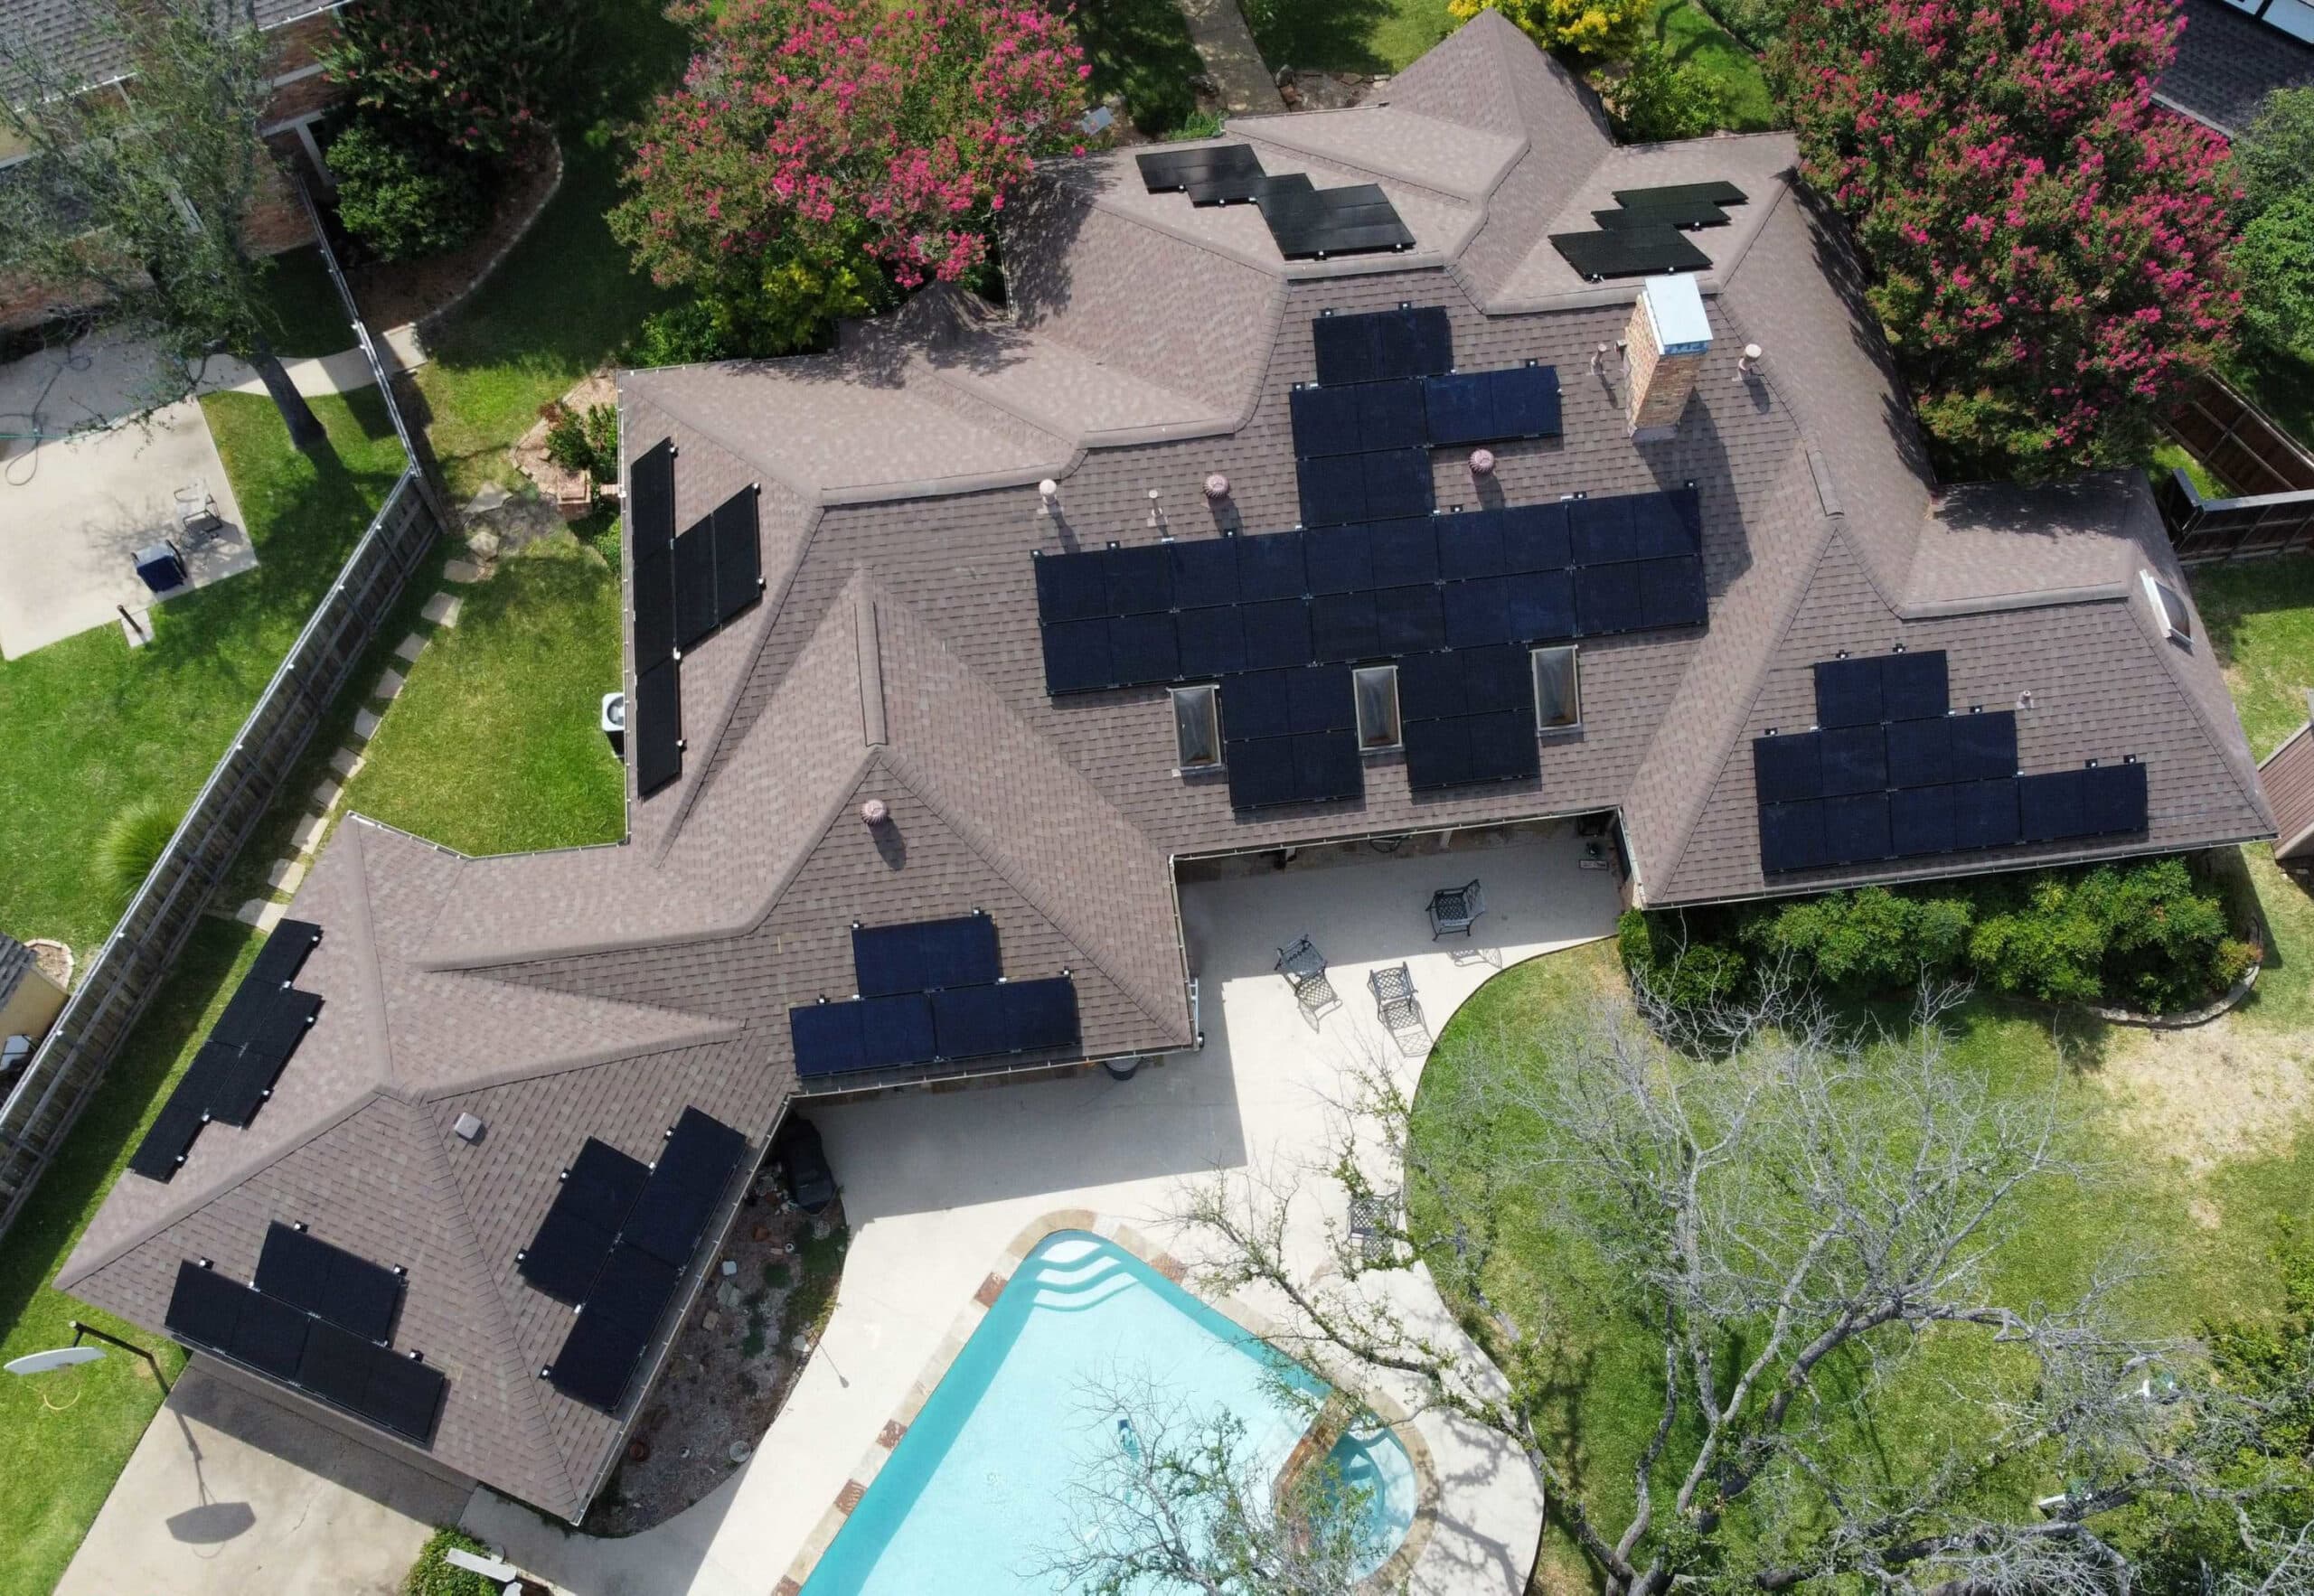 Grey solar roof with sleek black solar panels, captured from a drone's bird's-eye view.